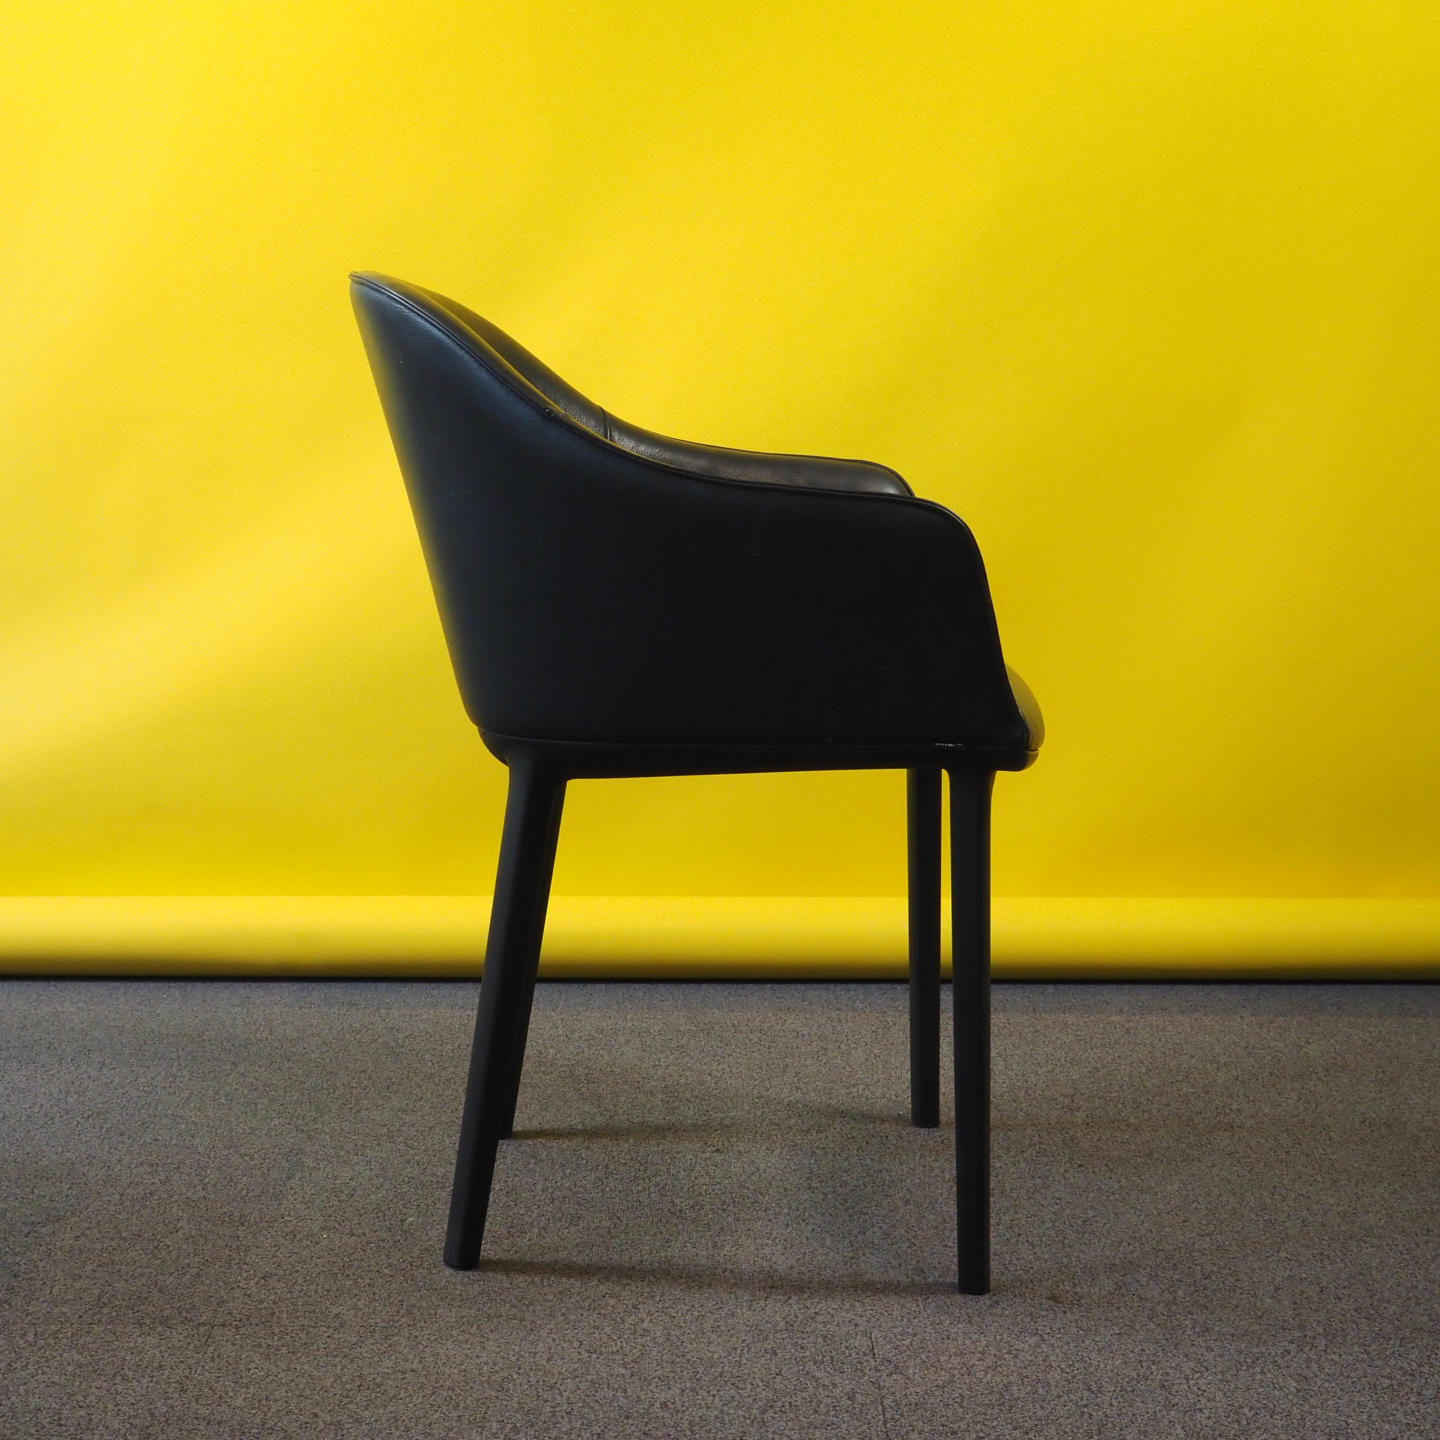 Armchair 'Softshell' in leather by Ronan &amp; Erwan Bouroullec for Vitra (ca. 2008) - Anthracite